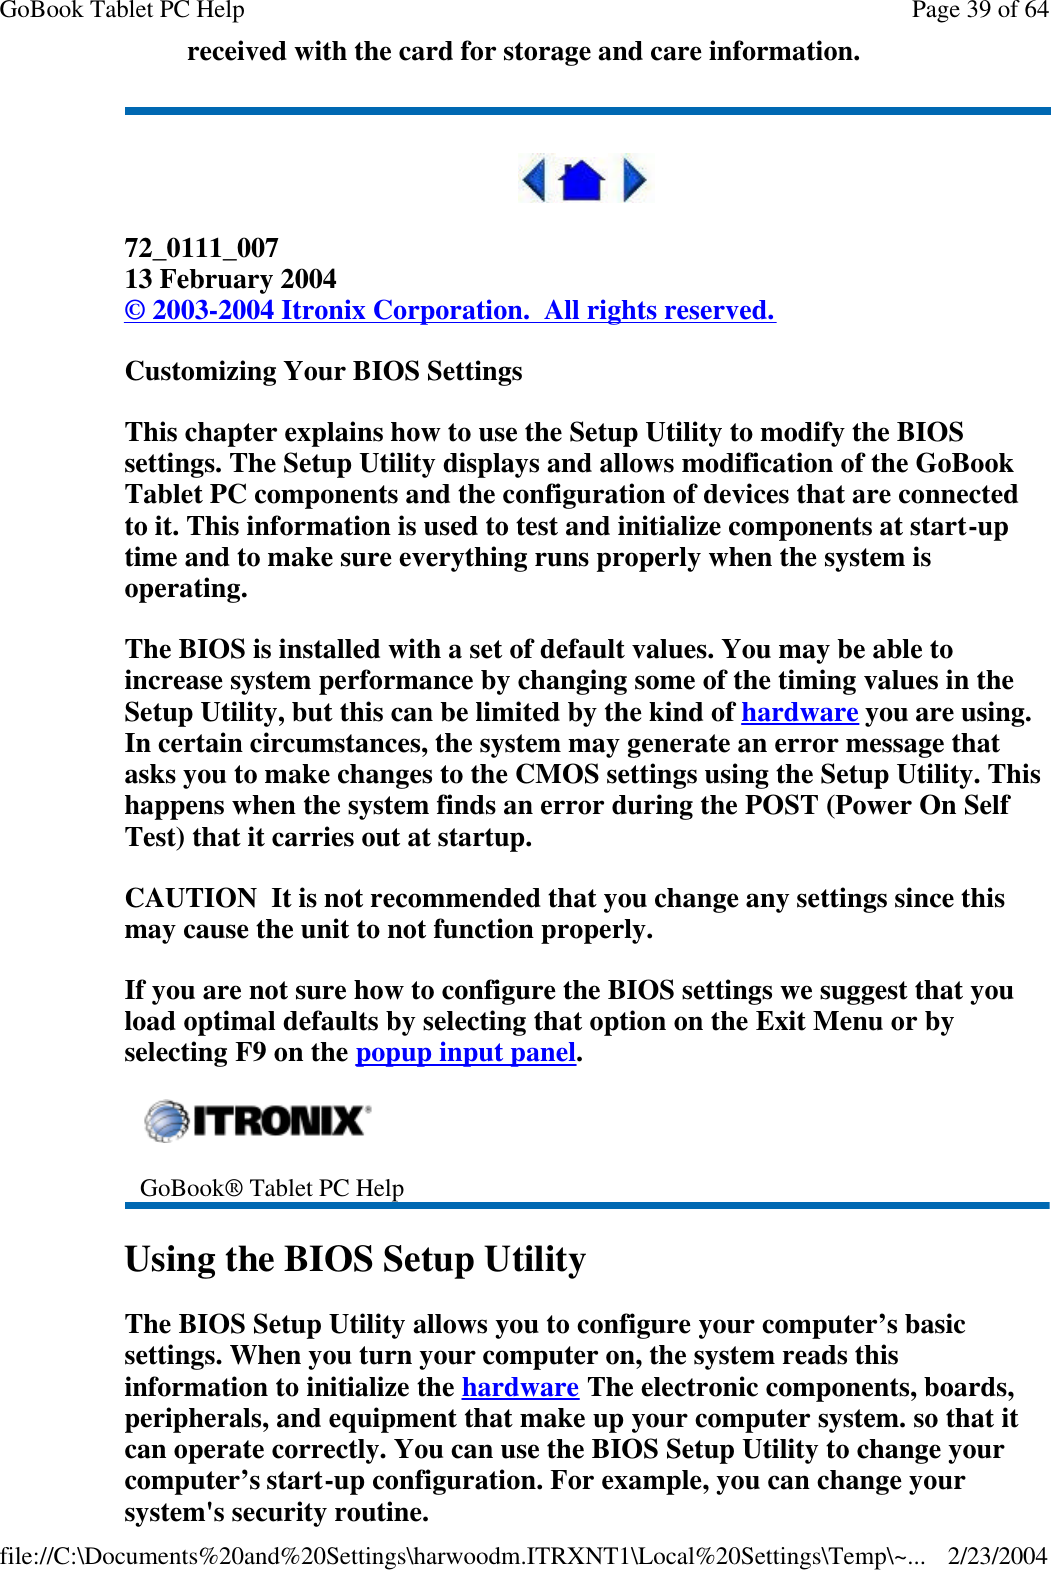 received with the card for storage and care information.  72_0111_007 13 February 2004 © 2003-2004 Itronix Corporation.  All rights reserved. Customizing Your BIOS Settings This chapter explains how to use the Setup Utility to modify the BIOS settings. The Setup Utility displays and allows modification of the GoBook Tablet PC components and the configuration of devices that are connected to it. This information is used to test and initialize components at start-up time and to make sure everything runs properly when the system is operating. The BIOS is installed with a set of default values. You may be able to increase system performance by changing some of the timing values in the Setup Utility, but this can be limited by the kind of hardware you are using. In certain circumstances, the system may generate an error message that asks you to make changes to the CMOS settings using the Setup Utility. This happens when the system finds an error during the POST (Power On Self Test) that it carries out at startup. CAUTION  It is not recommended that you change any settings since this may cause the unit to not function properly.   If you are not sure how to configure the BIOS settings we suggest that you load optimal defaults by selecting that option on the Exit Menu or by selecting F9 on the popup input panel. Using the BIOS Setup Utility The BIOS Setup Utility allows you to configure your computer’s basic settings. When you turn your computer on, the system reads this information to initialize the hardware The electronic components, boards, peripherals, and equipment that make up your computer system. so that it can operate correctly. You can use the BIOS Setup Utility to change your computer’s start-up configuration. For example, you can change your system&apos;s security routine.  GoBook® Tablet PC Help Page 39 of 64GoBook Tablet PC Help2/23/2004file://C:\Documents%20and%20Settings\harwoodm.ITRXNT1\Local%20Settings\Temp\~...